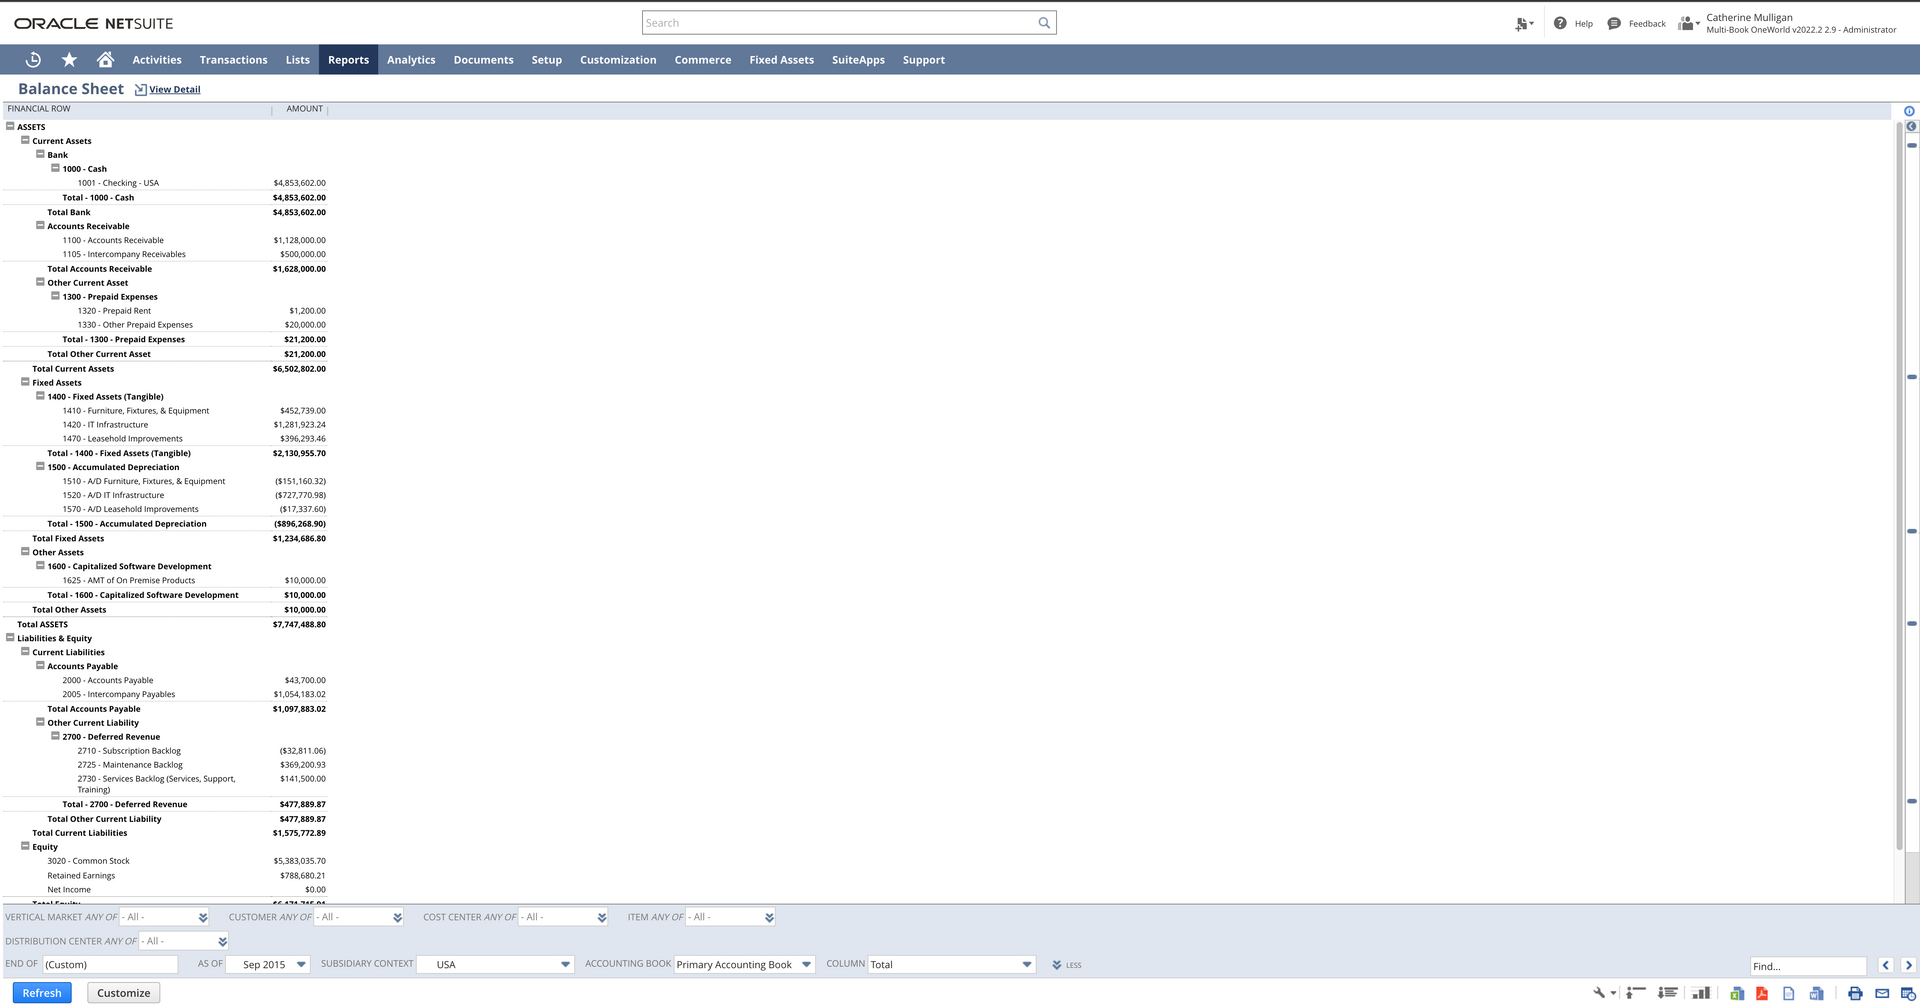 This is a screenshot of a preconfigured NetSuite report.